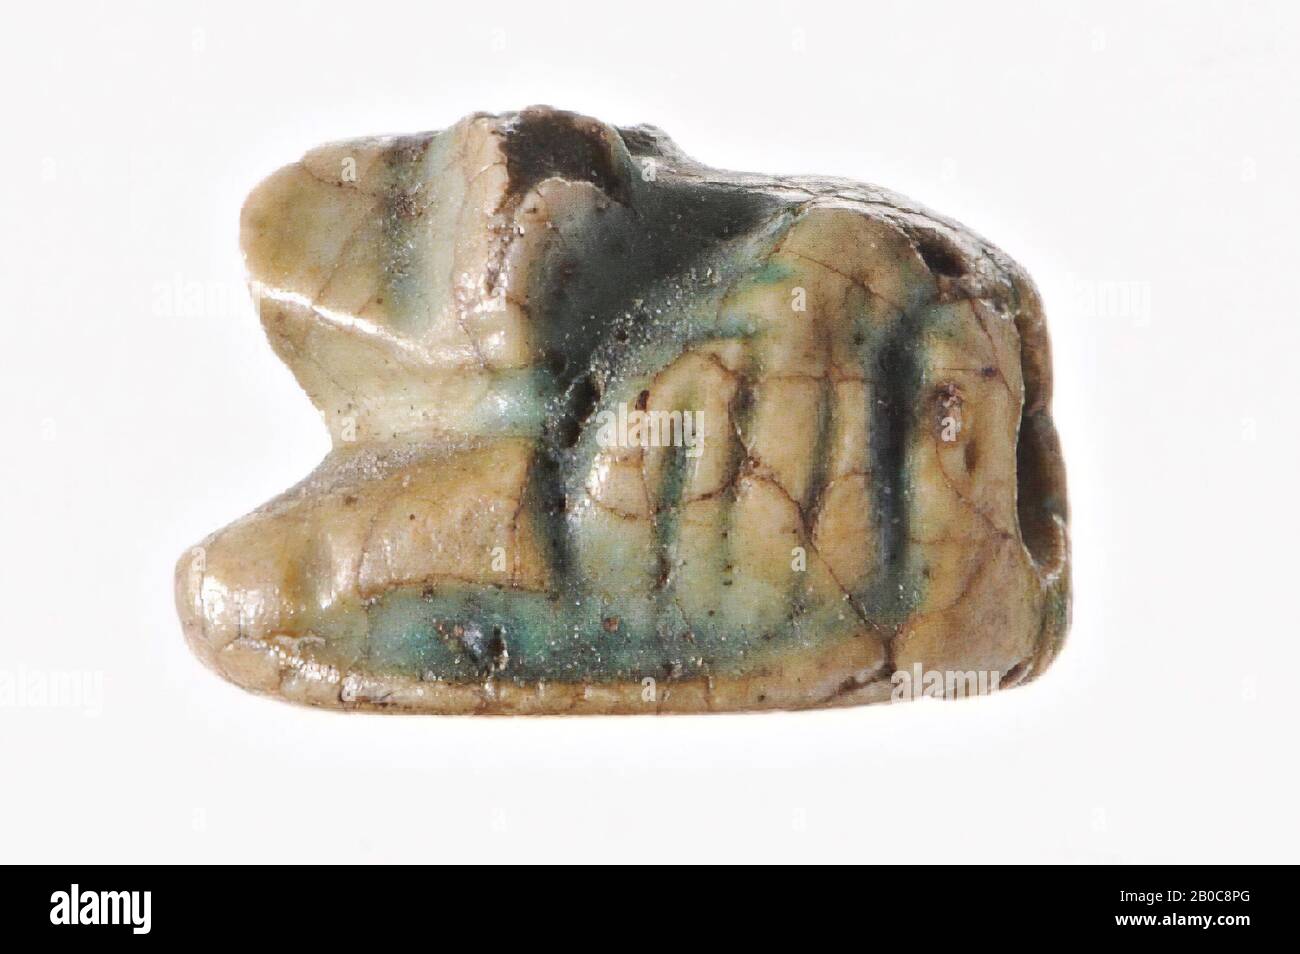 plaque, hedgehog, feather, snake, In the green glazed scaraboid of steatite in the shape of a hedgehog, two uraeus snakes tête bêche are carved into the sealing surface within a framing groove. The seal is pierced lengthwise., Seal, scaraboid, green glazed steatite, 0,6 × 0,5 × 0,4 cm, Late Period, Egypt Stock Photo